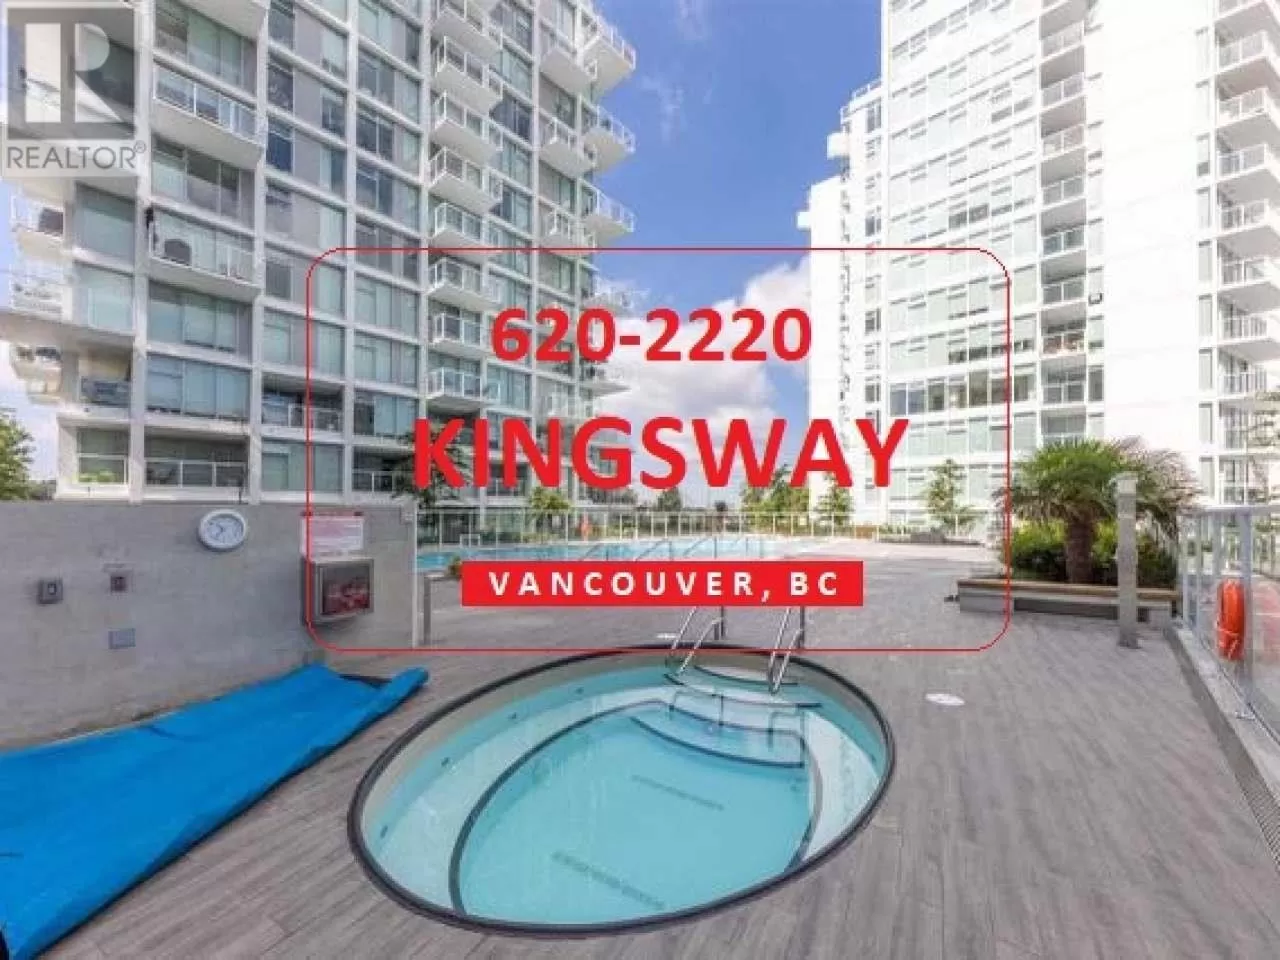 Apartment for rent: 620 2220 Kingsway Avenue, Vancouver, British Columbia V5N 2T7